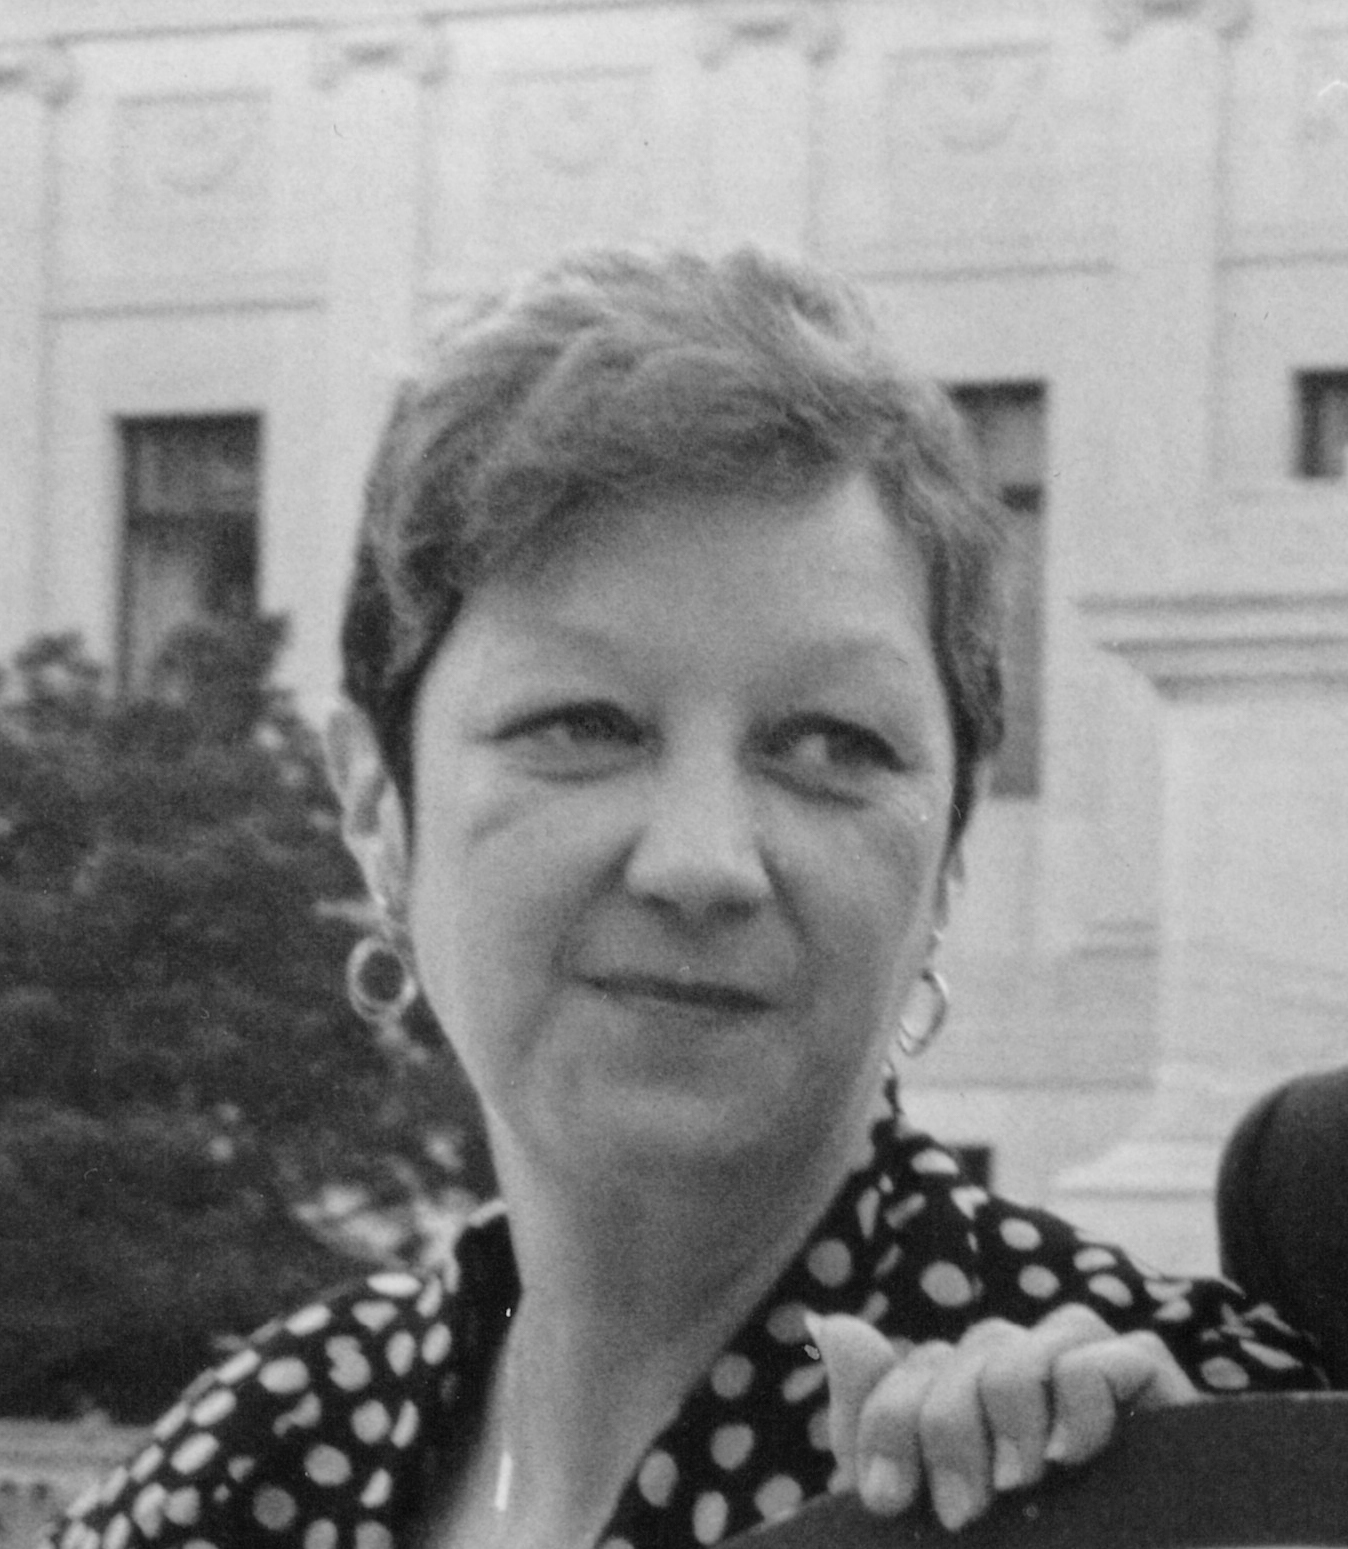 Norma_McCorvey_%28Jane_Roe%29_onthe_steps_of_the_Supreme_Court%2C_1989_%28cropped%29.jpg